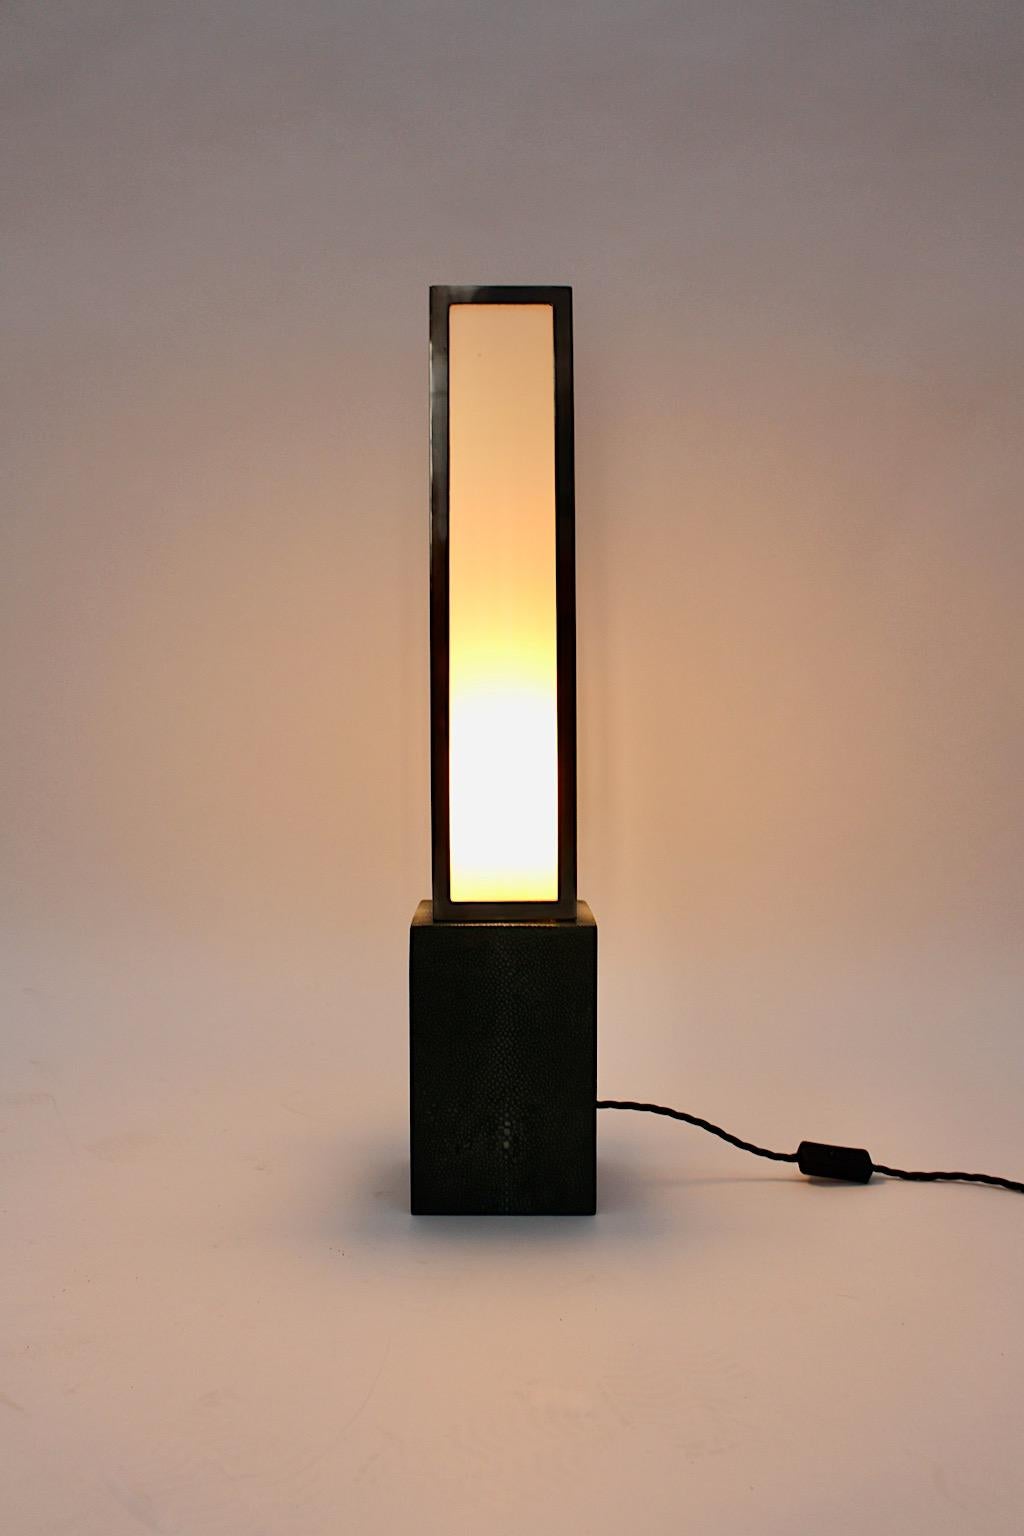 Art Deco Vintage Geometric Table Lamp Style Eckart Muthesius 1920s Germany For Sale 5